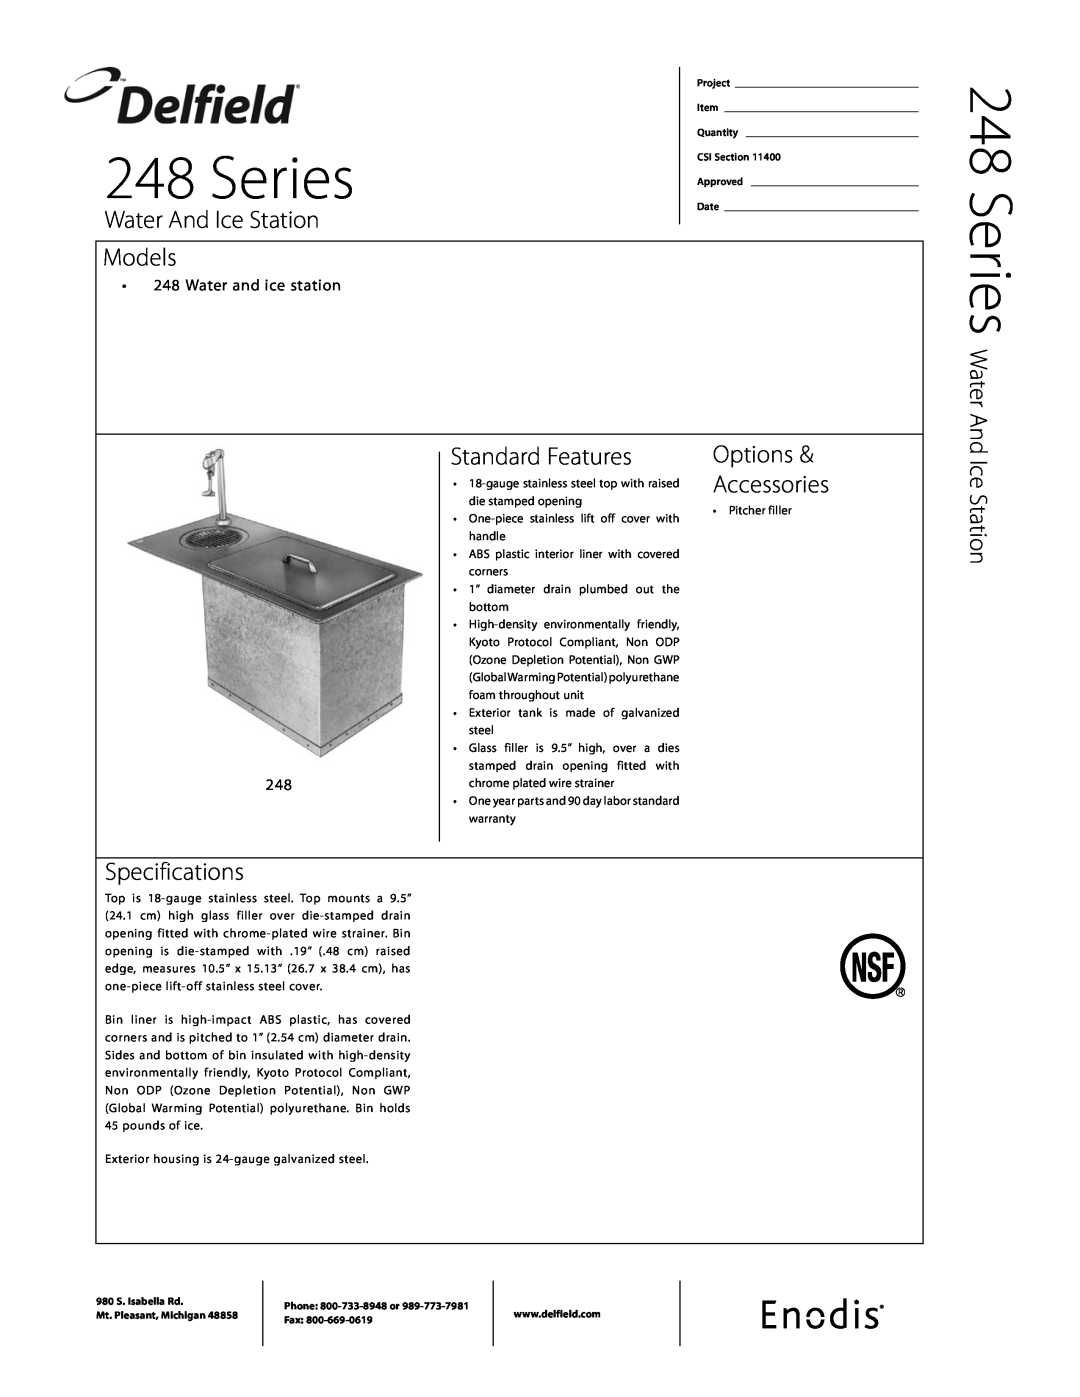 Delfield 248 Series specifications Series Water And, Water And Ice Station, Models, Standard Features, Specifications 